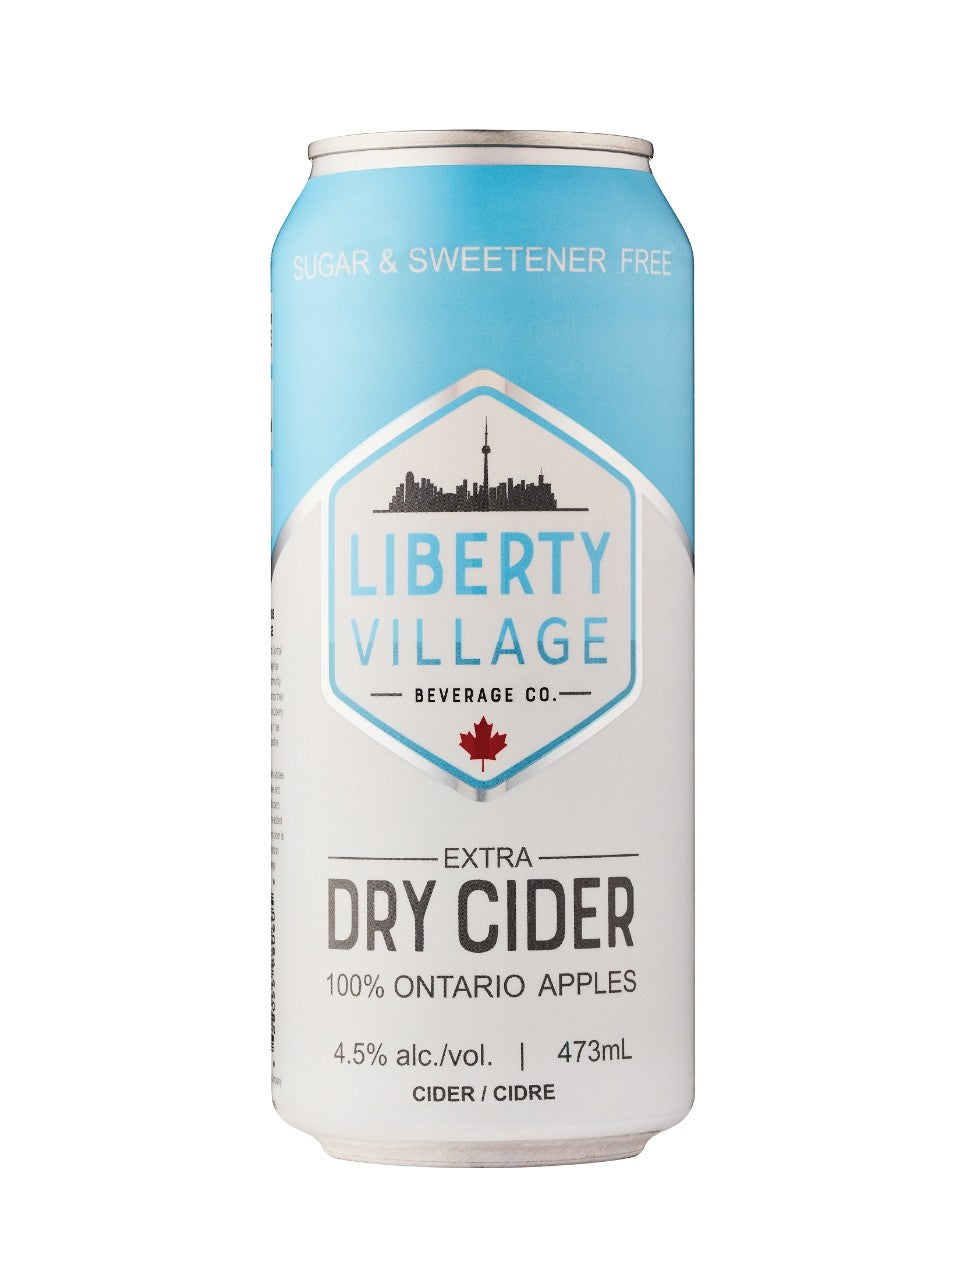 Liberty Village Dry Cider 473 mL can